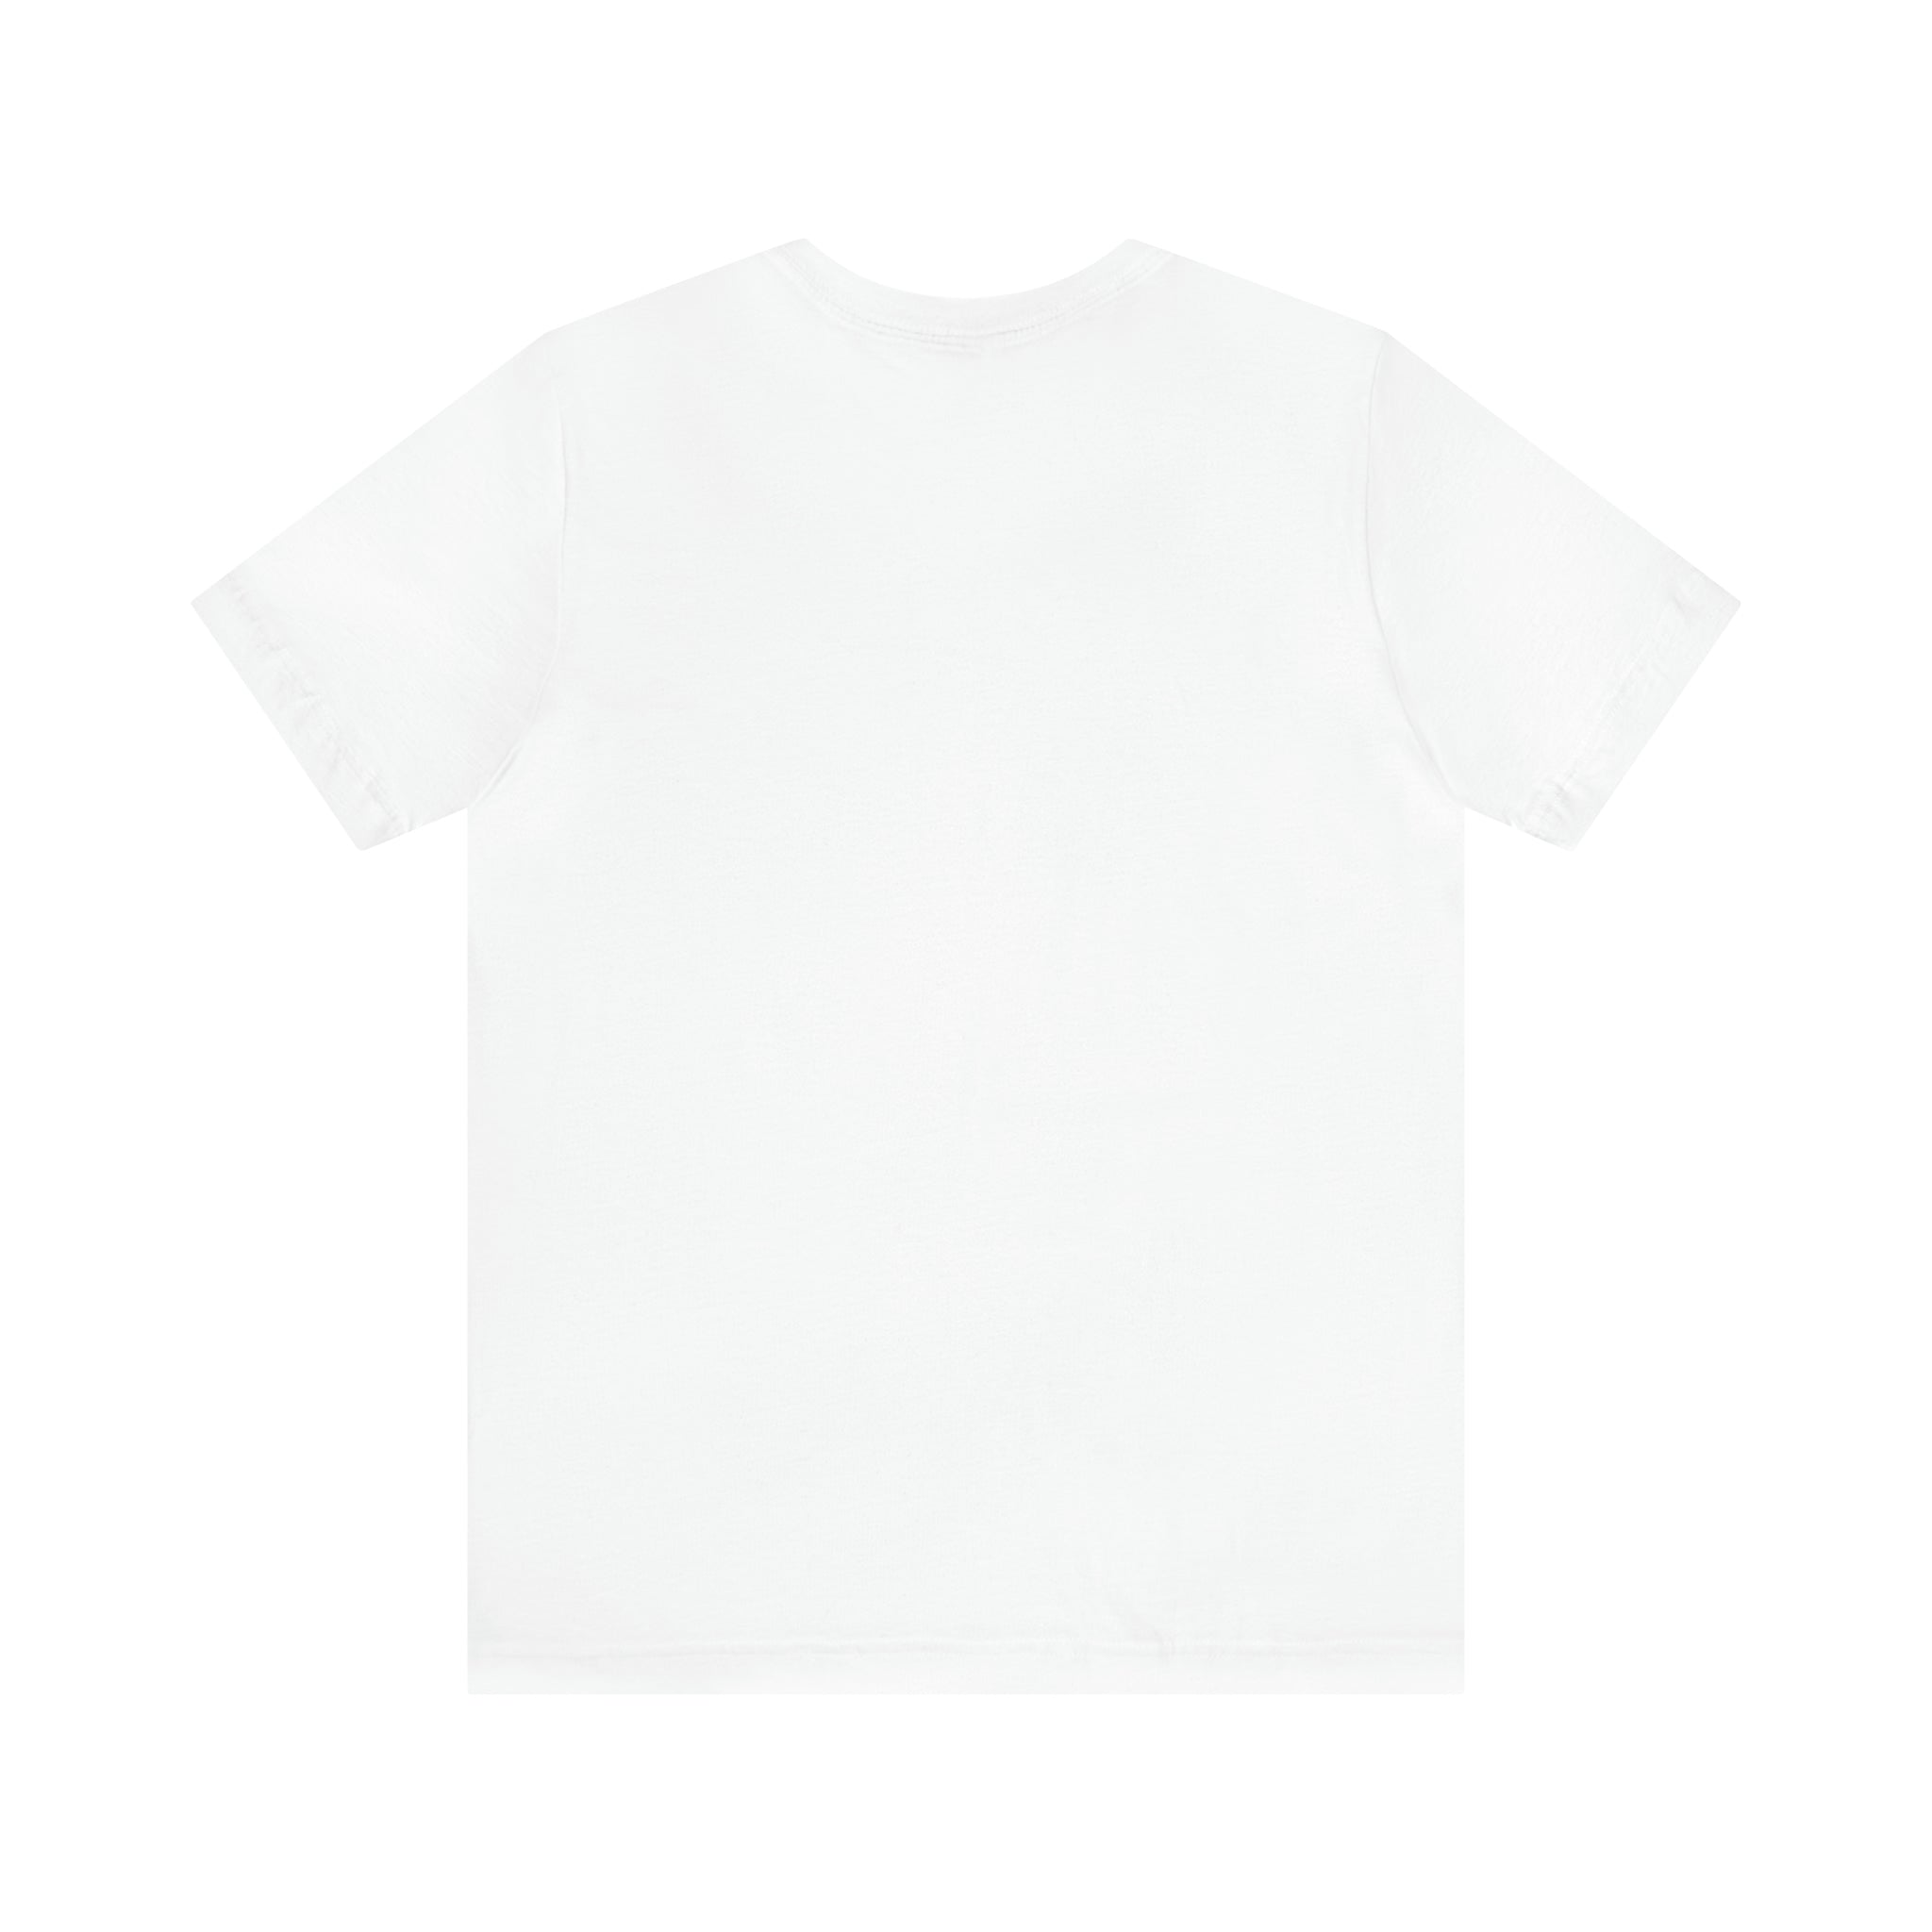 A Happily Introverted T-Shirt on a plain white background.